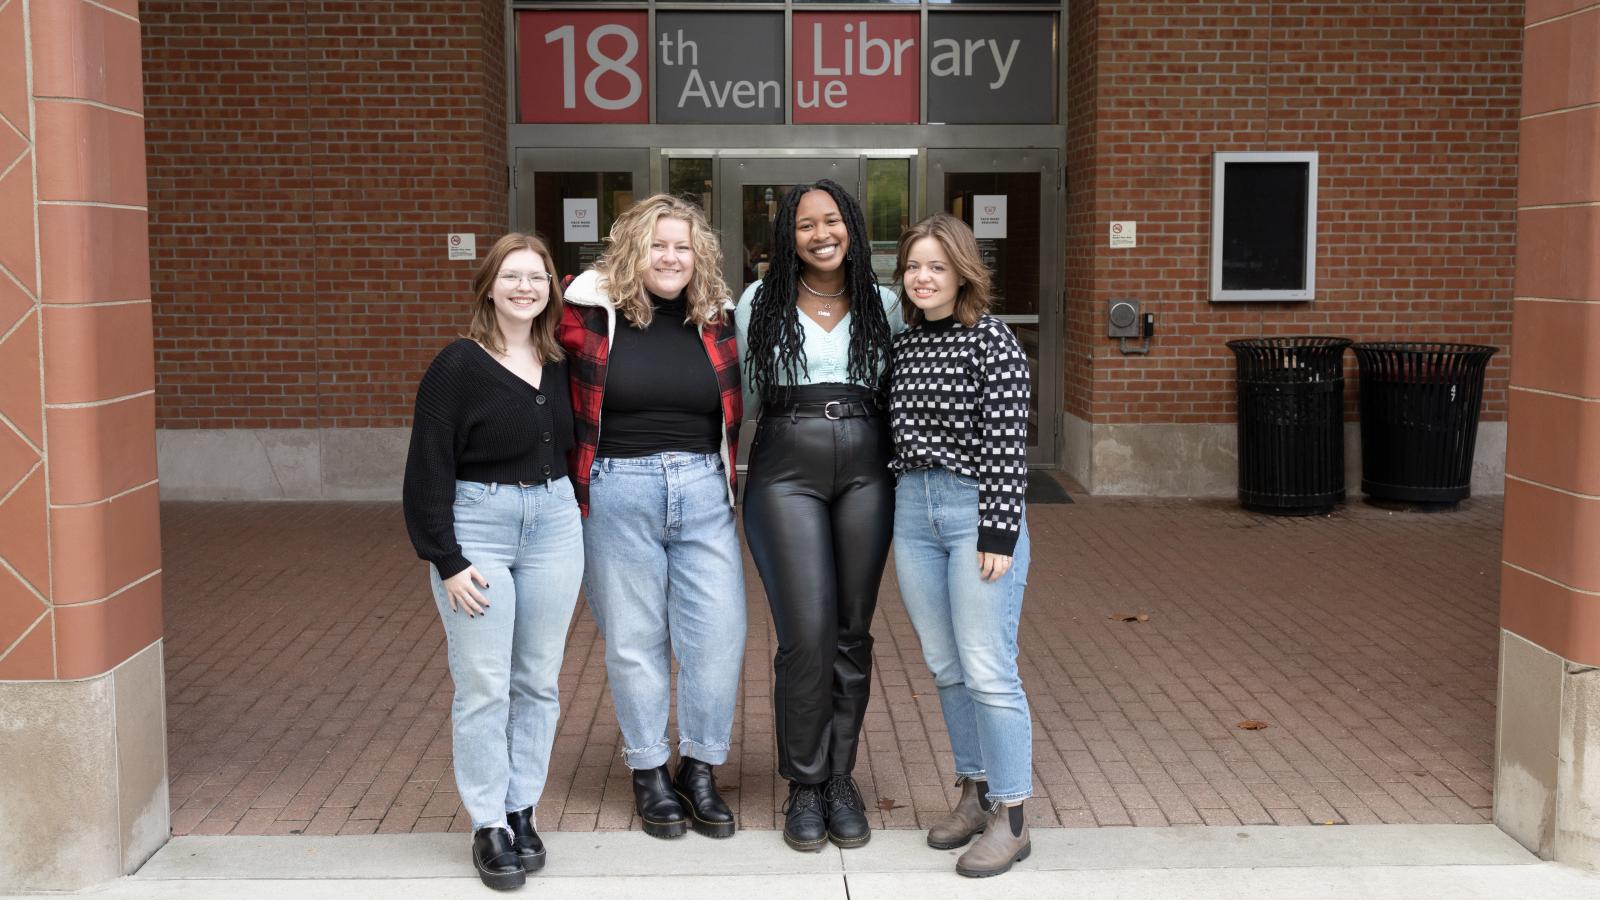 Four students standing outside 18th Avenue Library